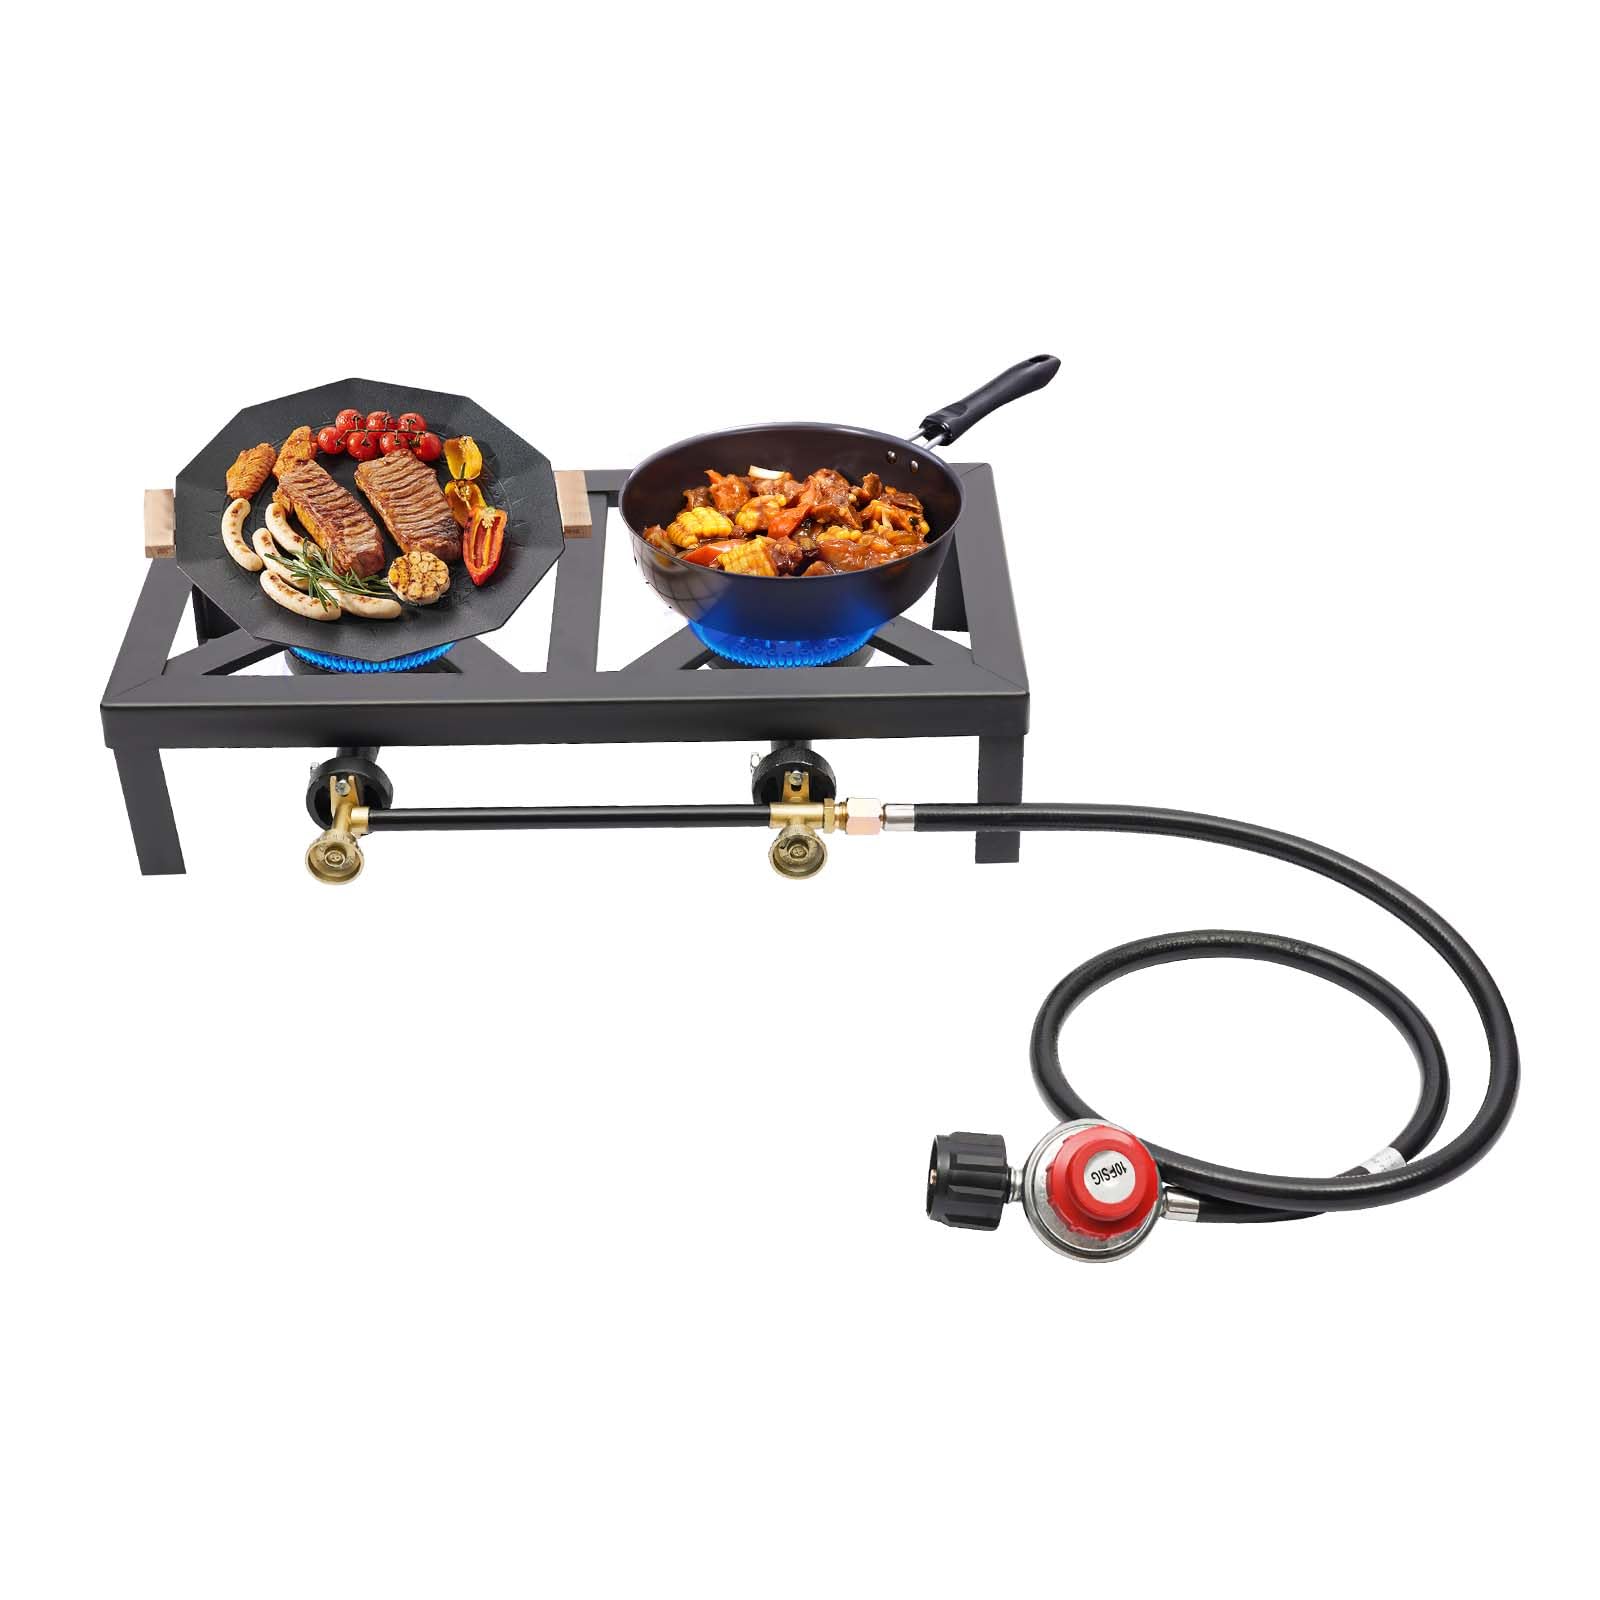 Double Propane Burner, 2 Burner Outdoor Portable Propane Stove Gas Cooker, Camping Stove with Detachable Stand Legs, Outdoor Cooking Stove for Backyard Cooking Camping Home Brewing Canning